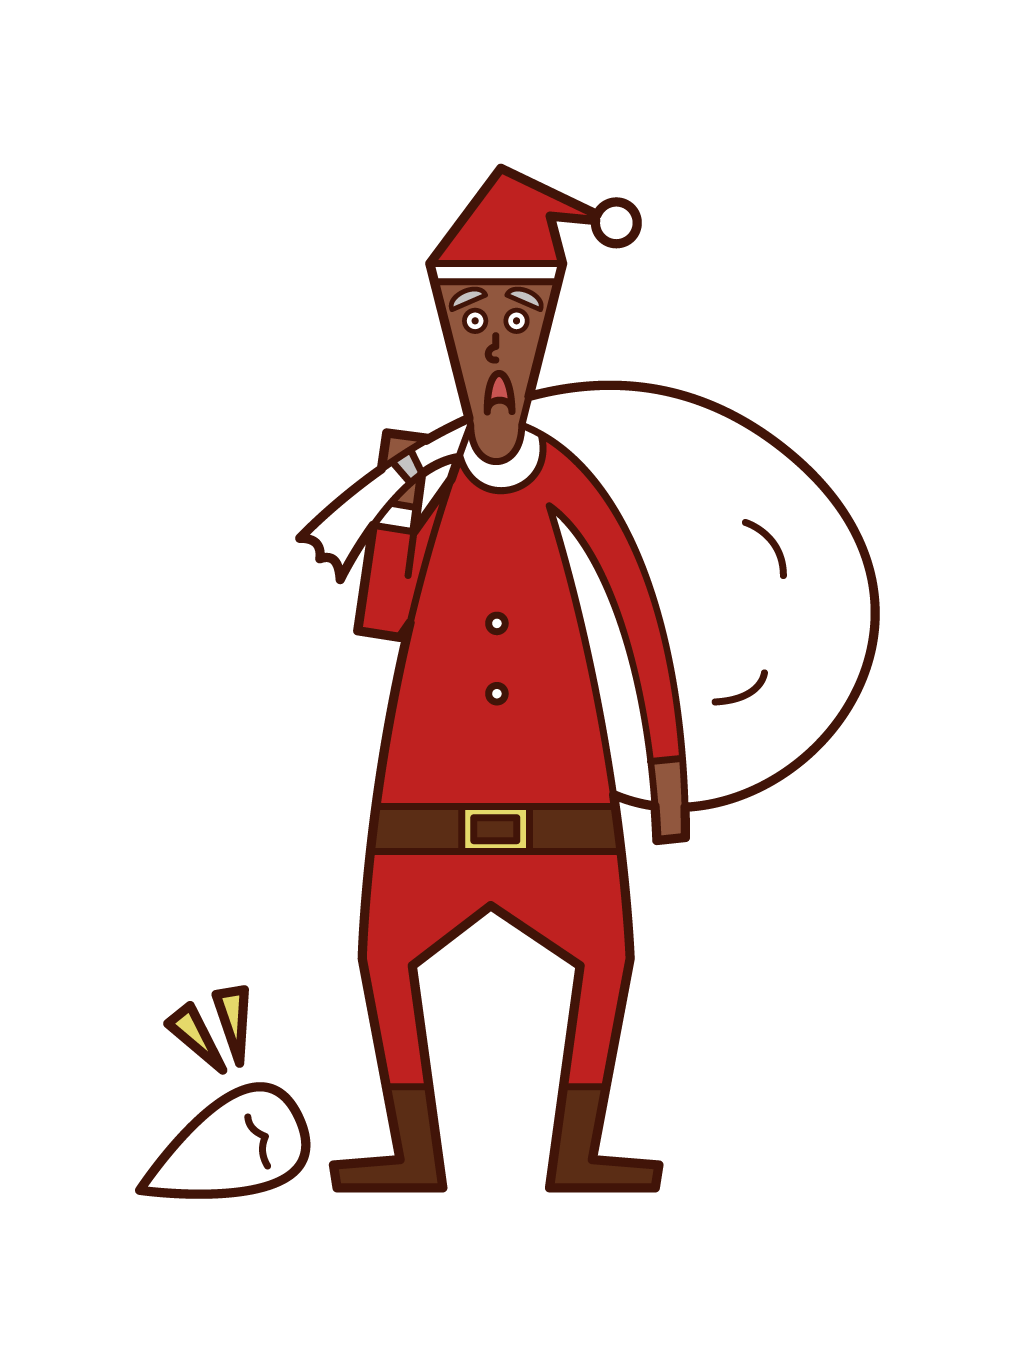 Illustration of Santa Claus (man) who dropped the axe